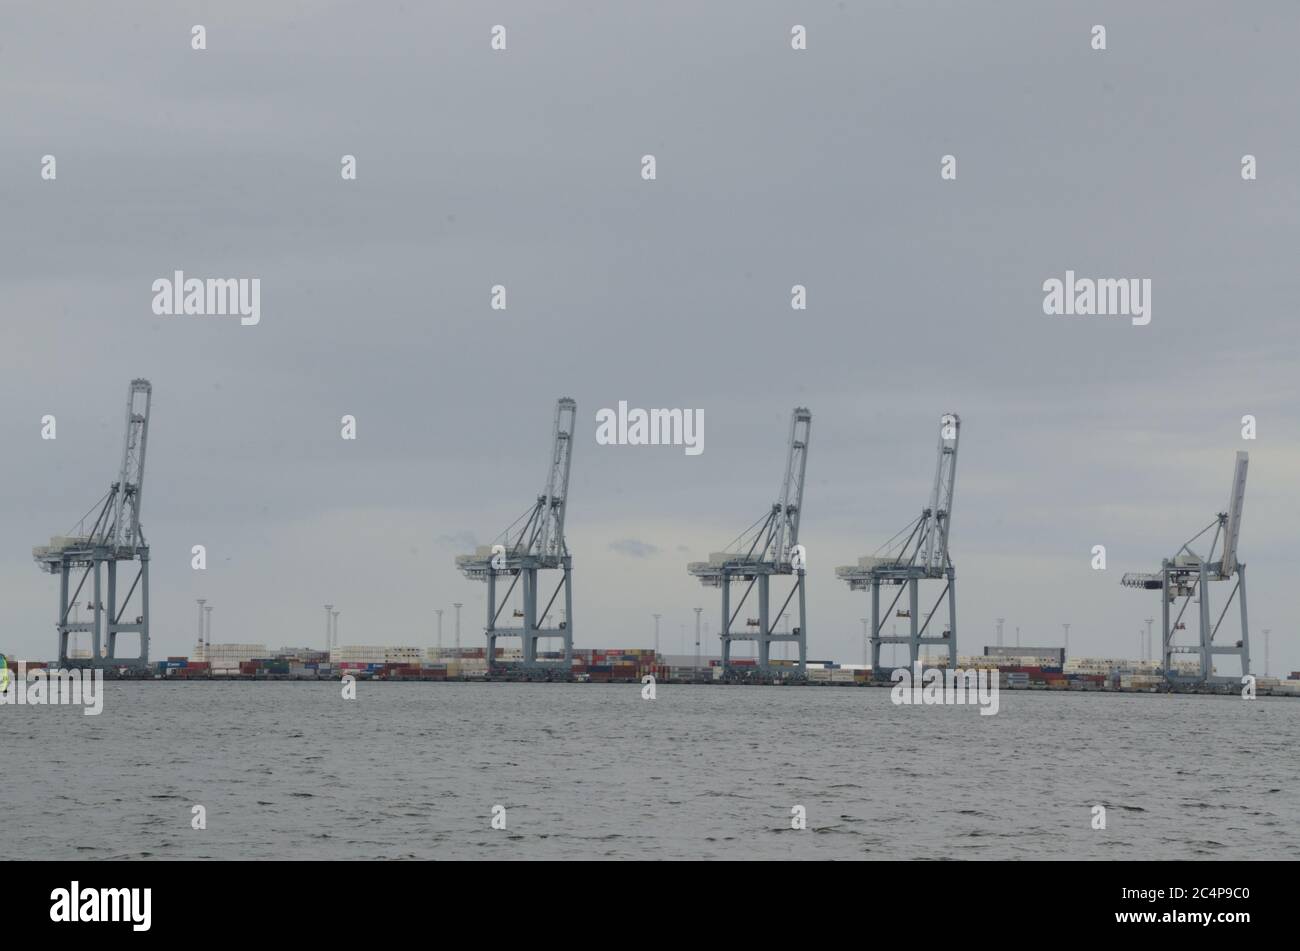 Five large container cranes at Aarhus container port in Denmark in the background Stock Photo